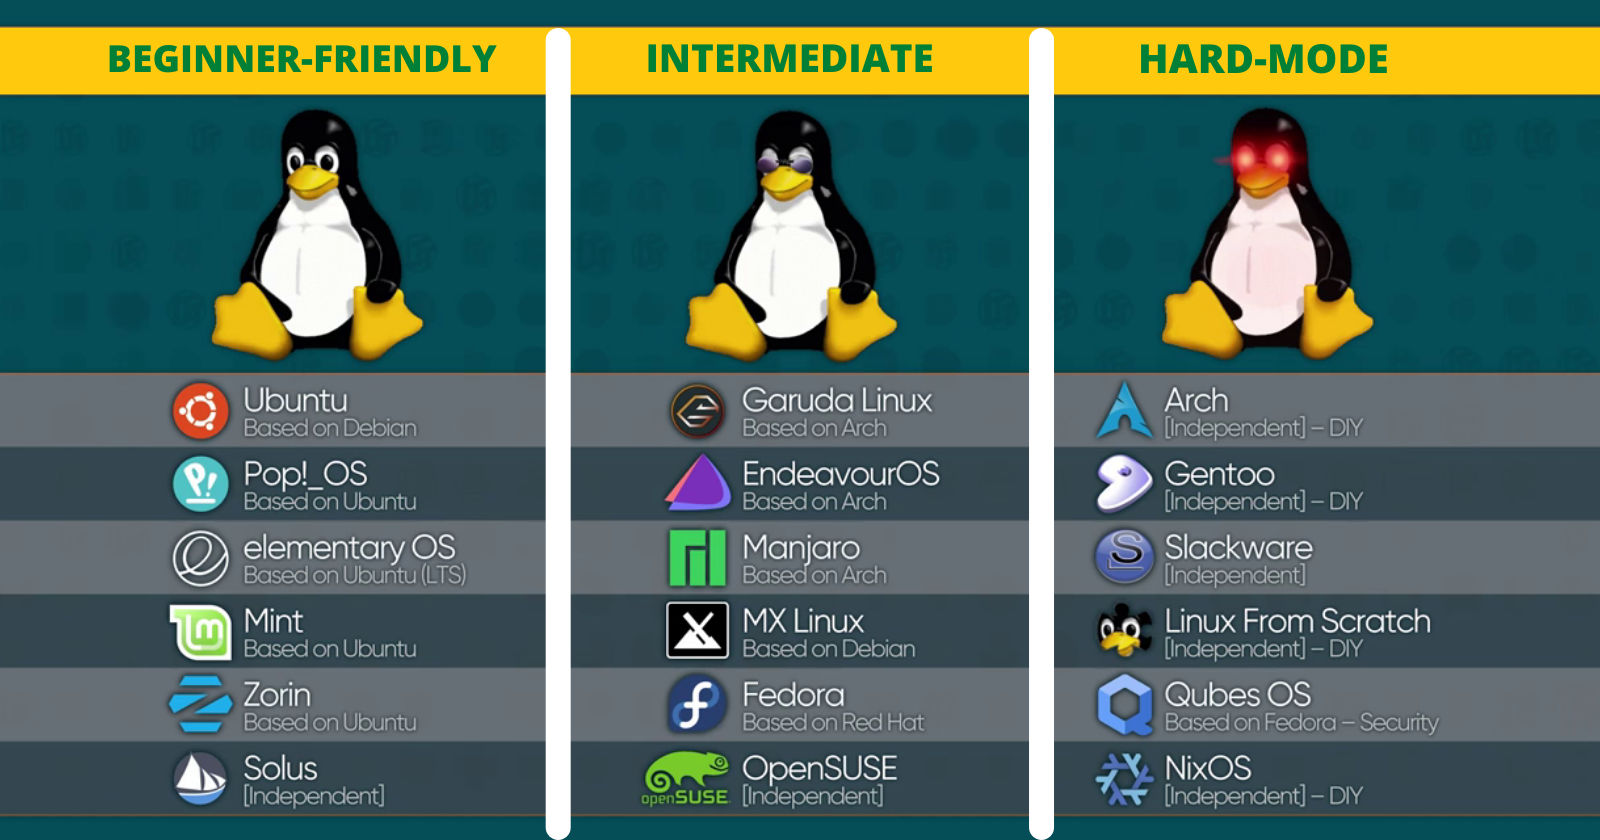 Types of Linux Distros based on ease of use